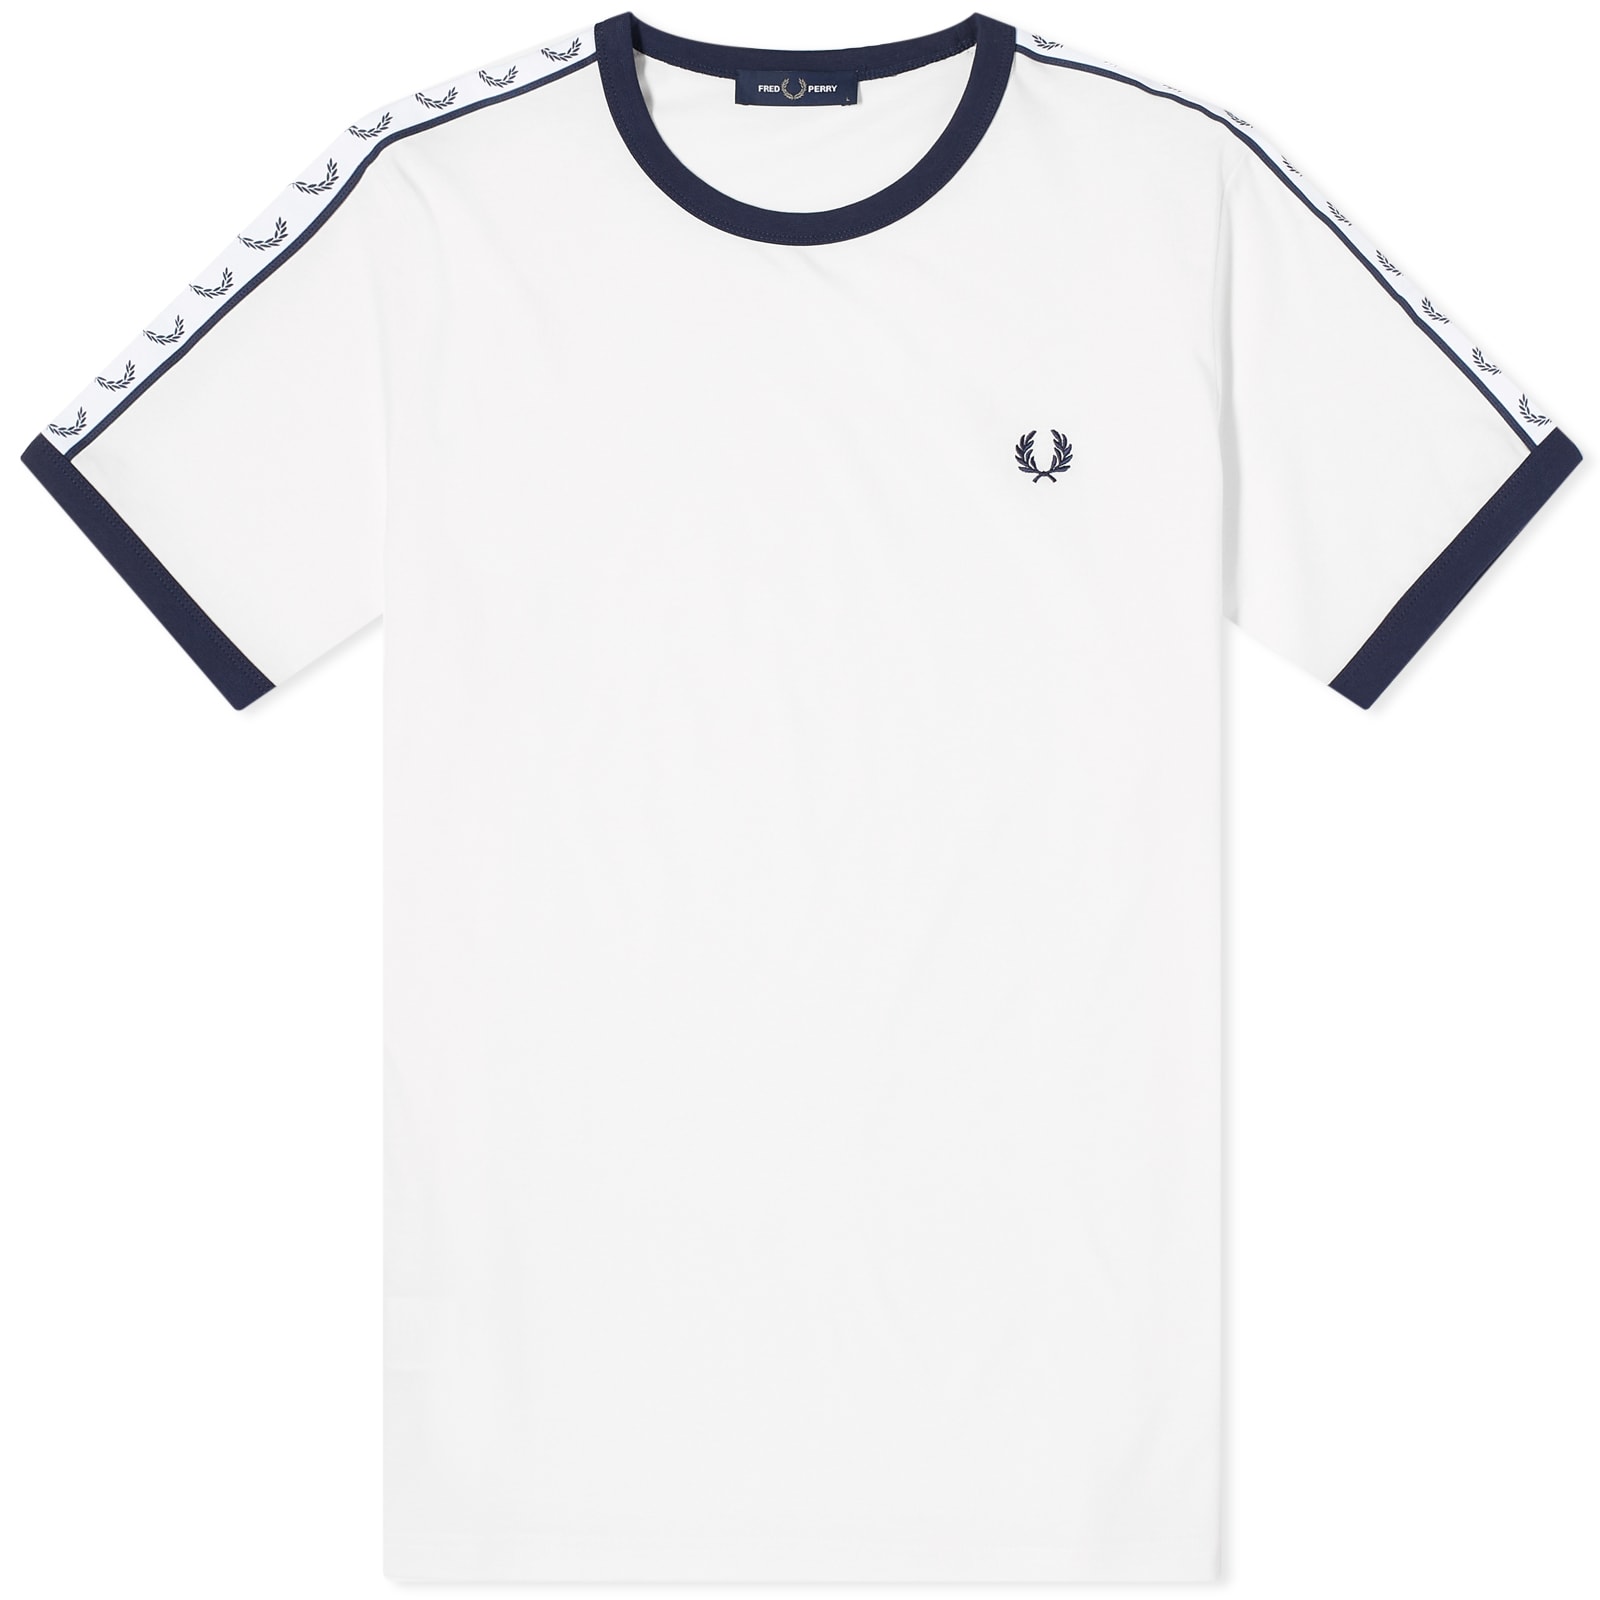 Футболка Fred Perry Taped Ringer, белый